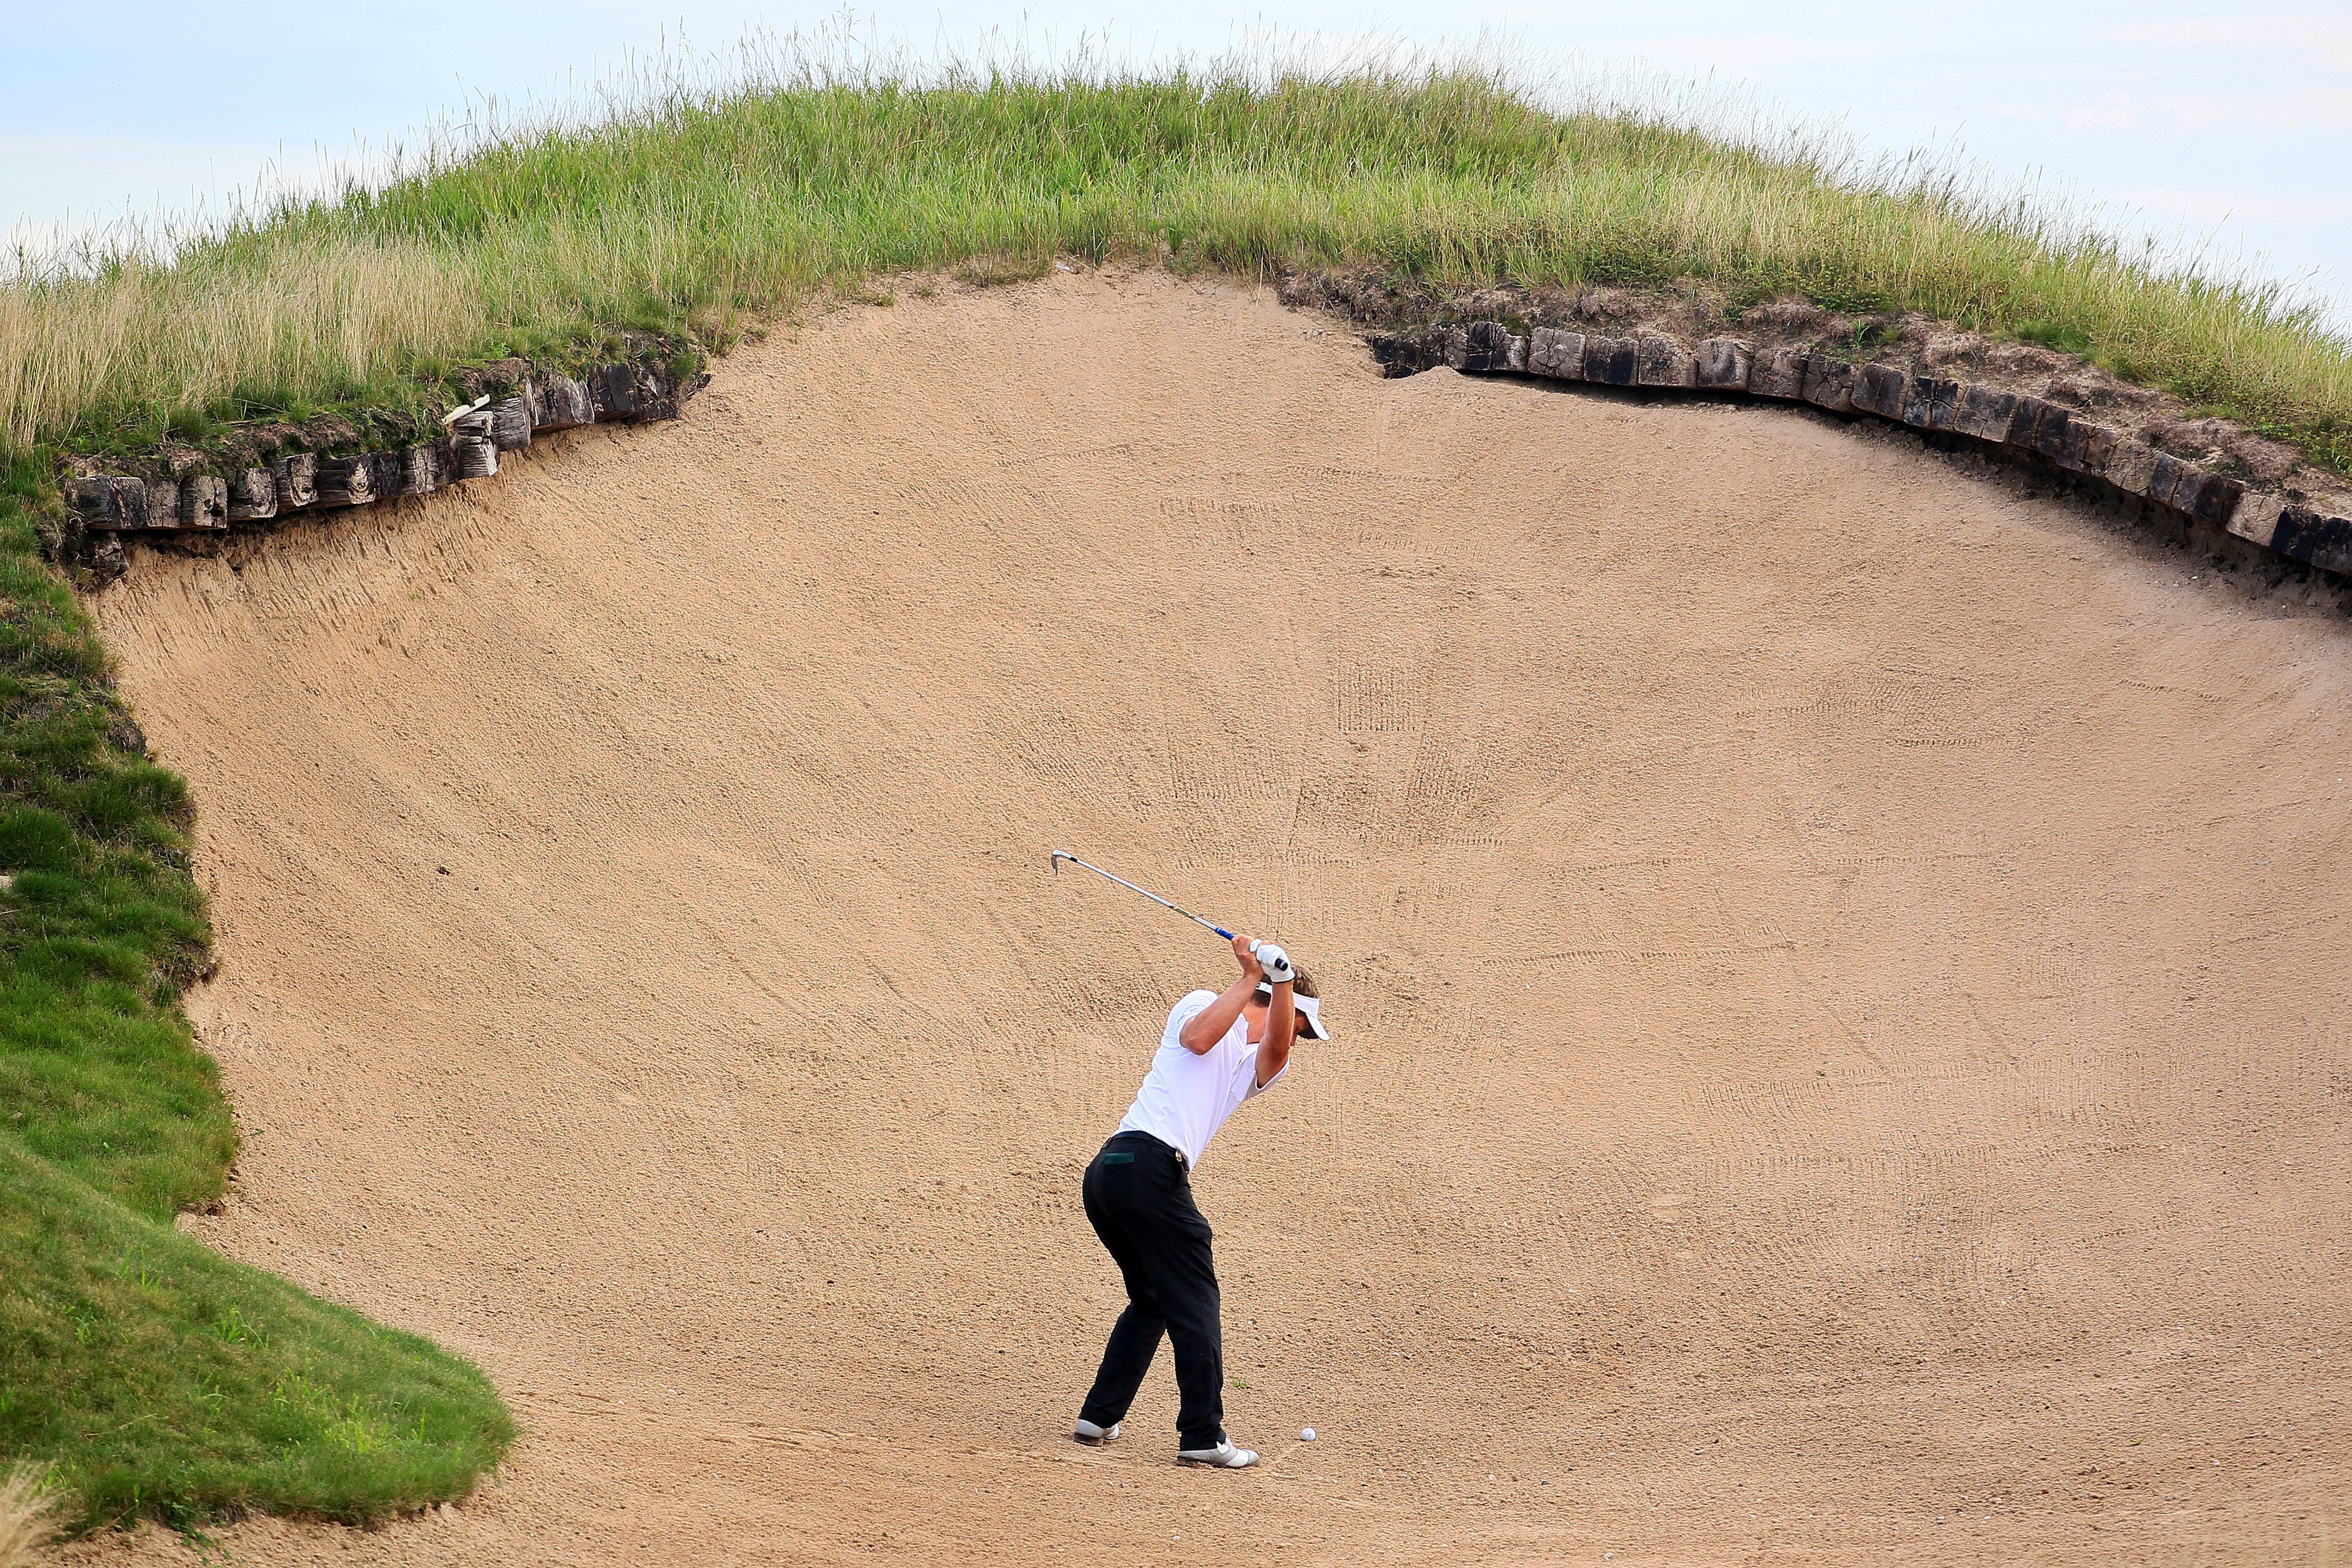 KOHLER, WI - AUGUST 14:  Luke Donald of England plays a bunker shot on the 11th hole during the continuation of the second round of the 92nd PGA Championship on the Straits Course at Whistling Straits on August 14, 2010 in Kohler, Wisconsin.  (Photo by An